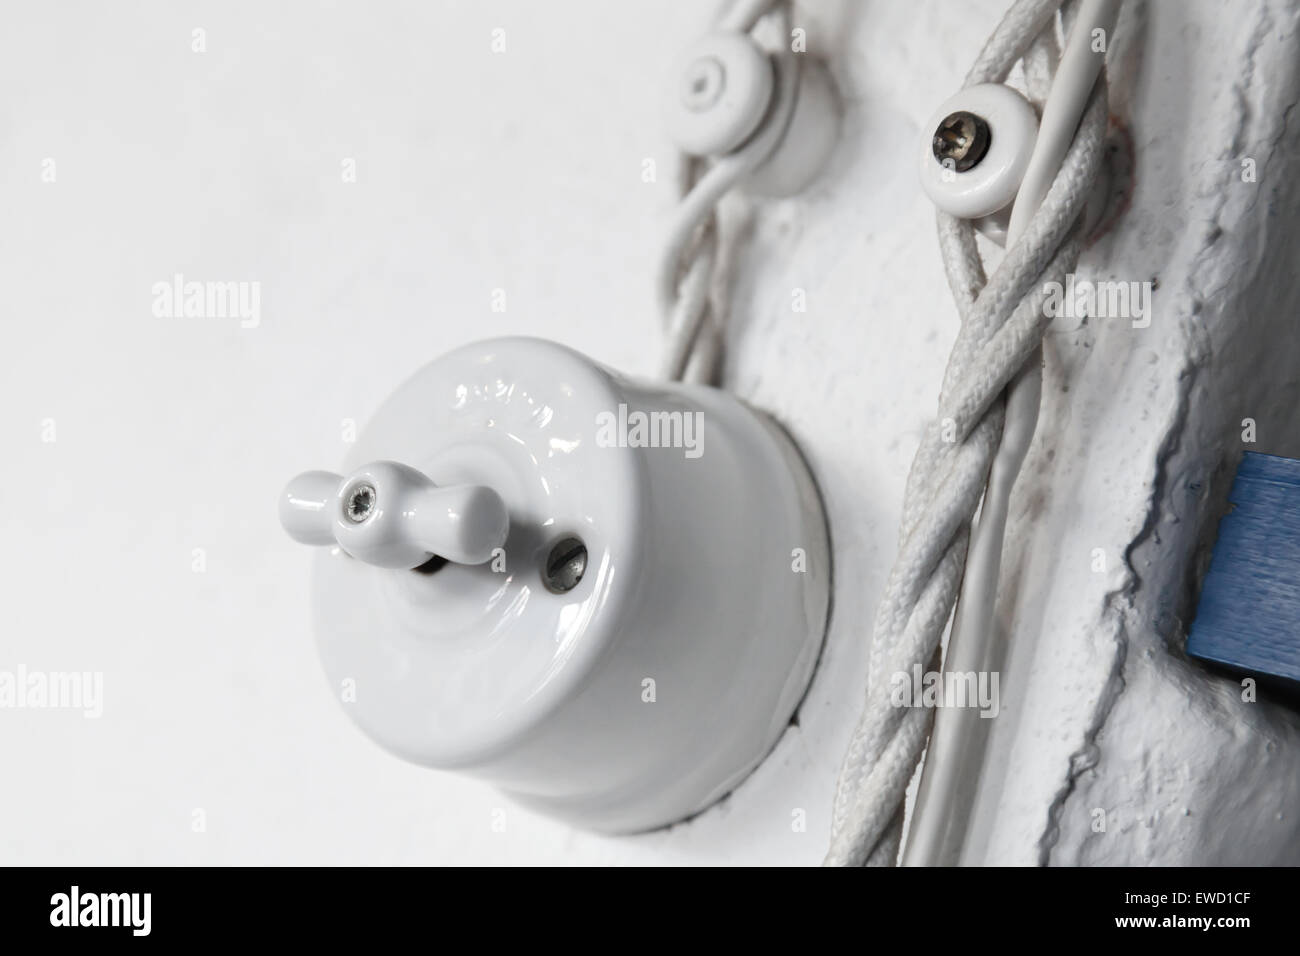 Vintage white ceramic electric switch with turning key mounted on the wall Stock Photo